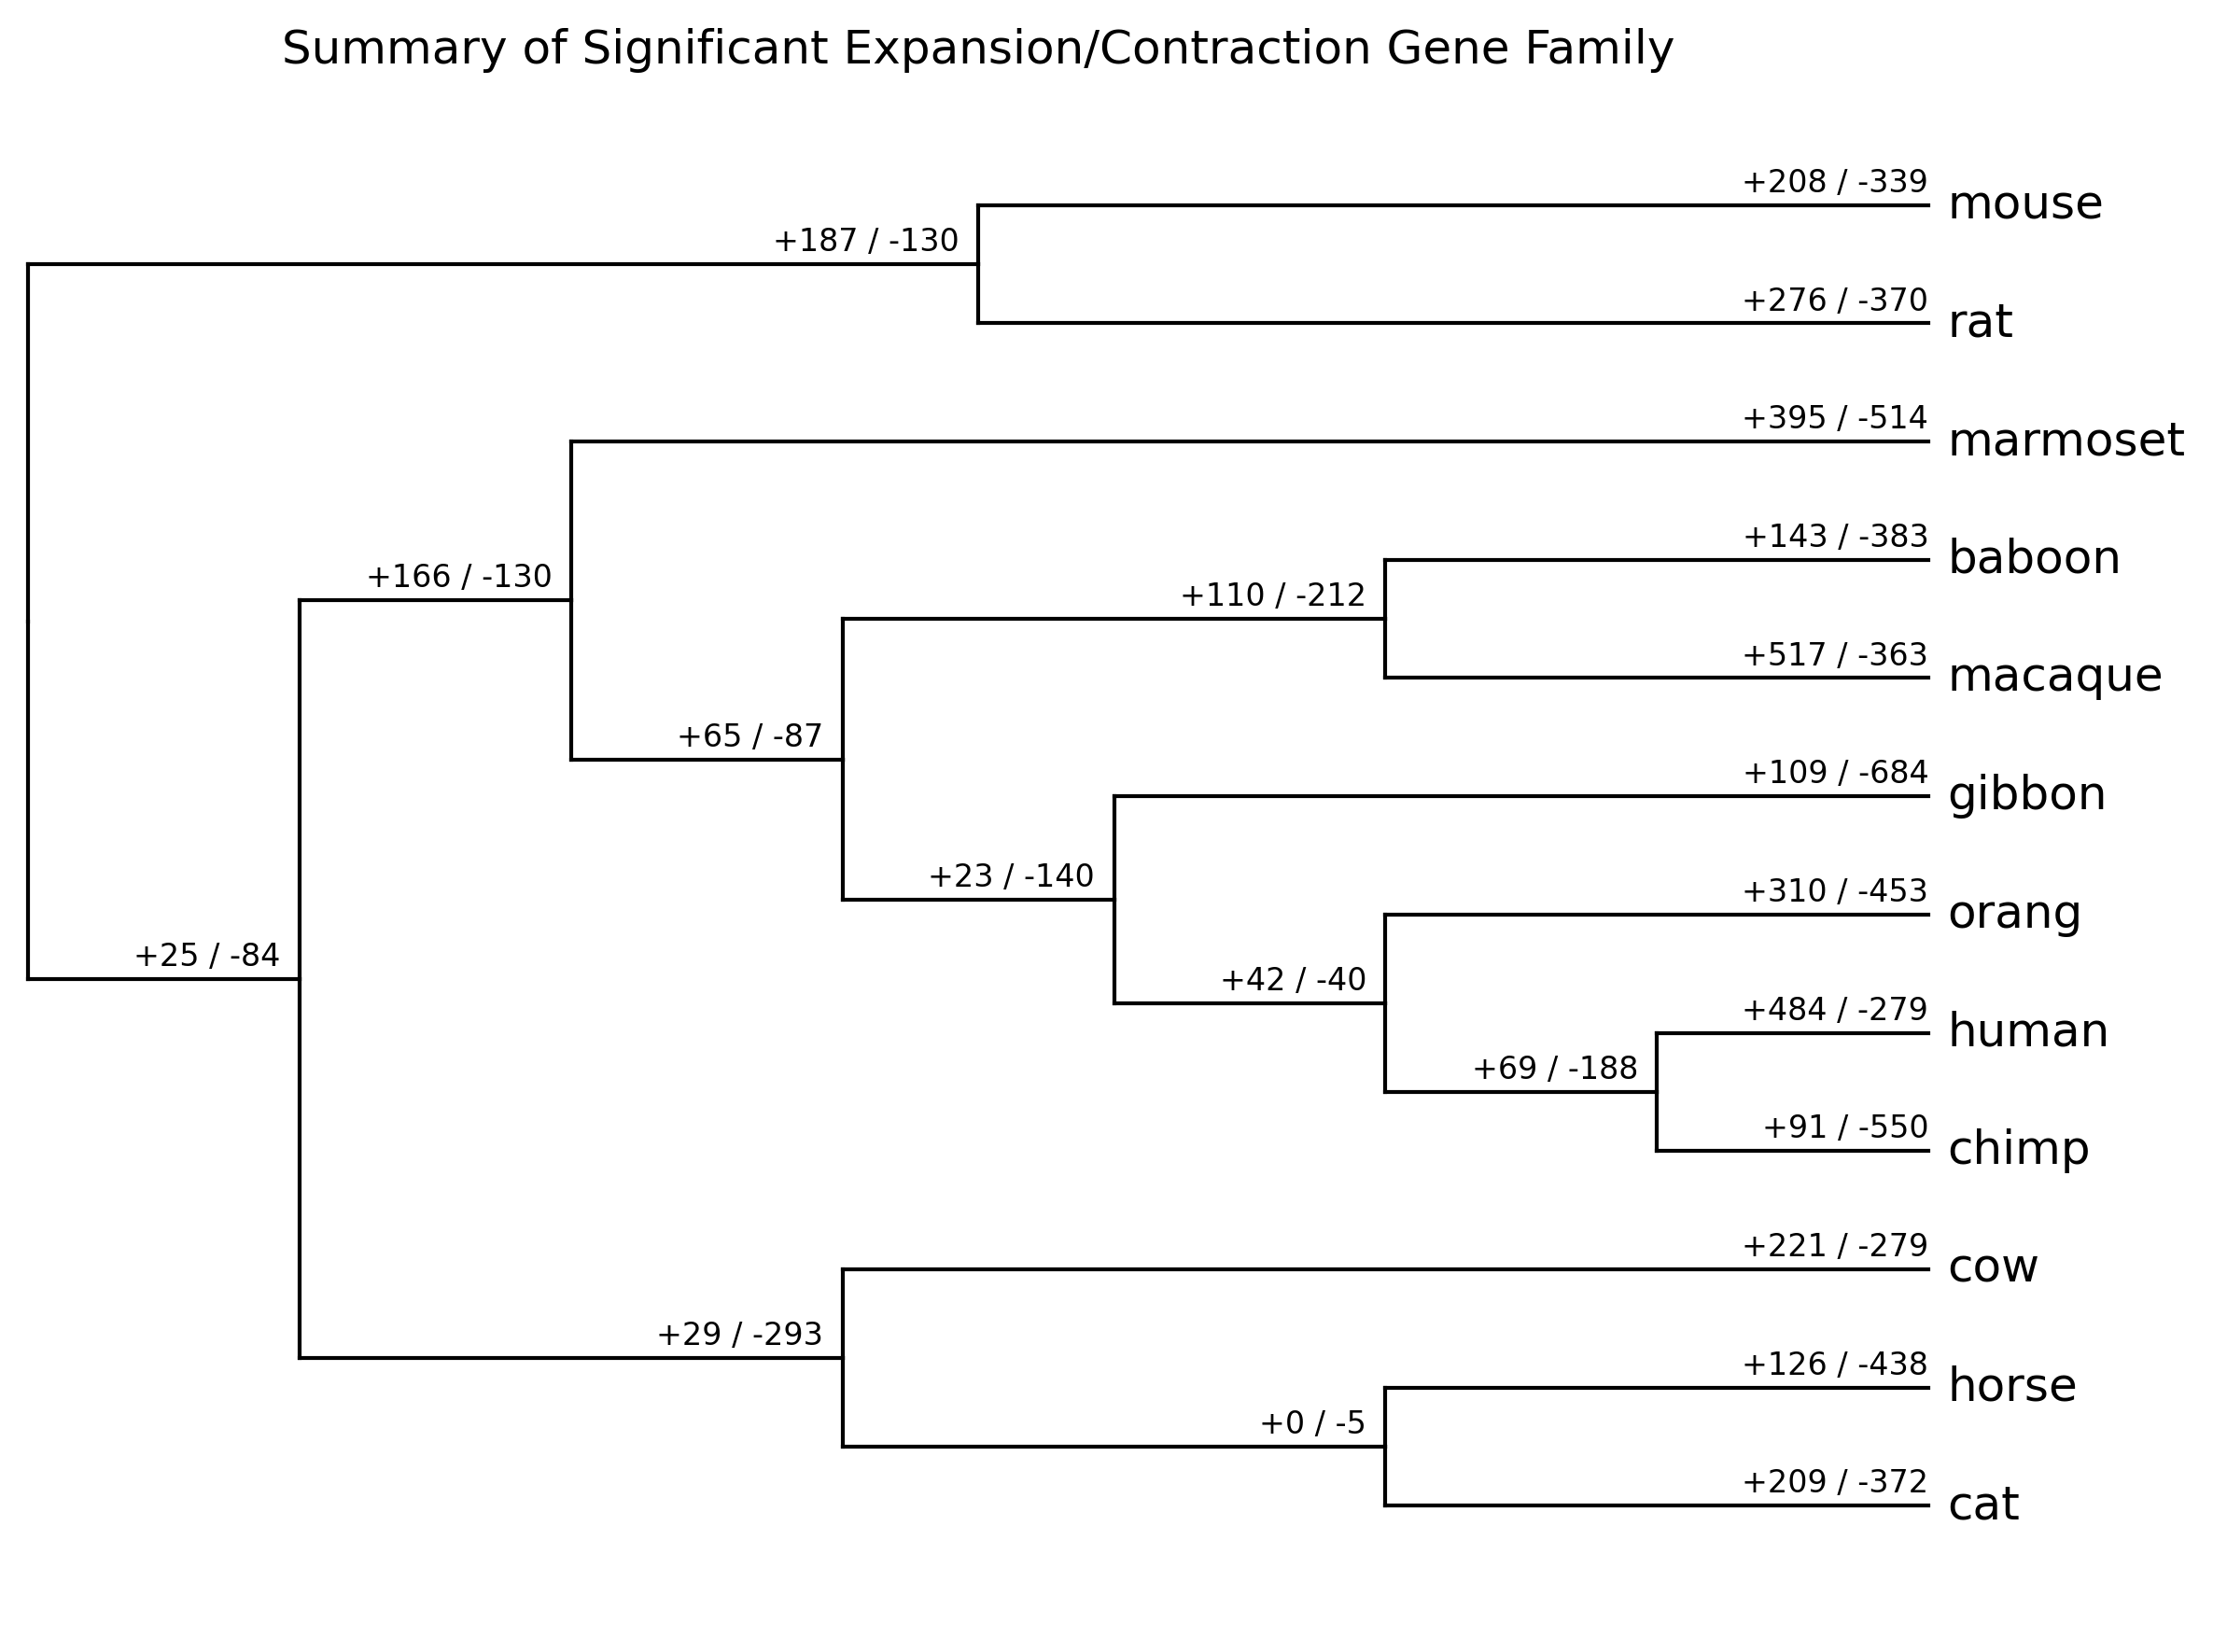 summary_significant_gene_family.png